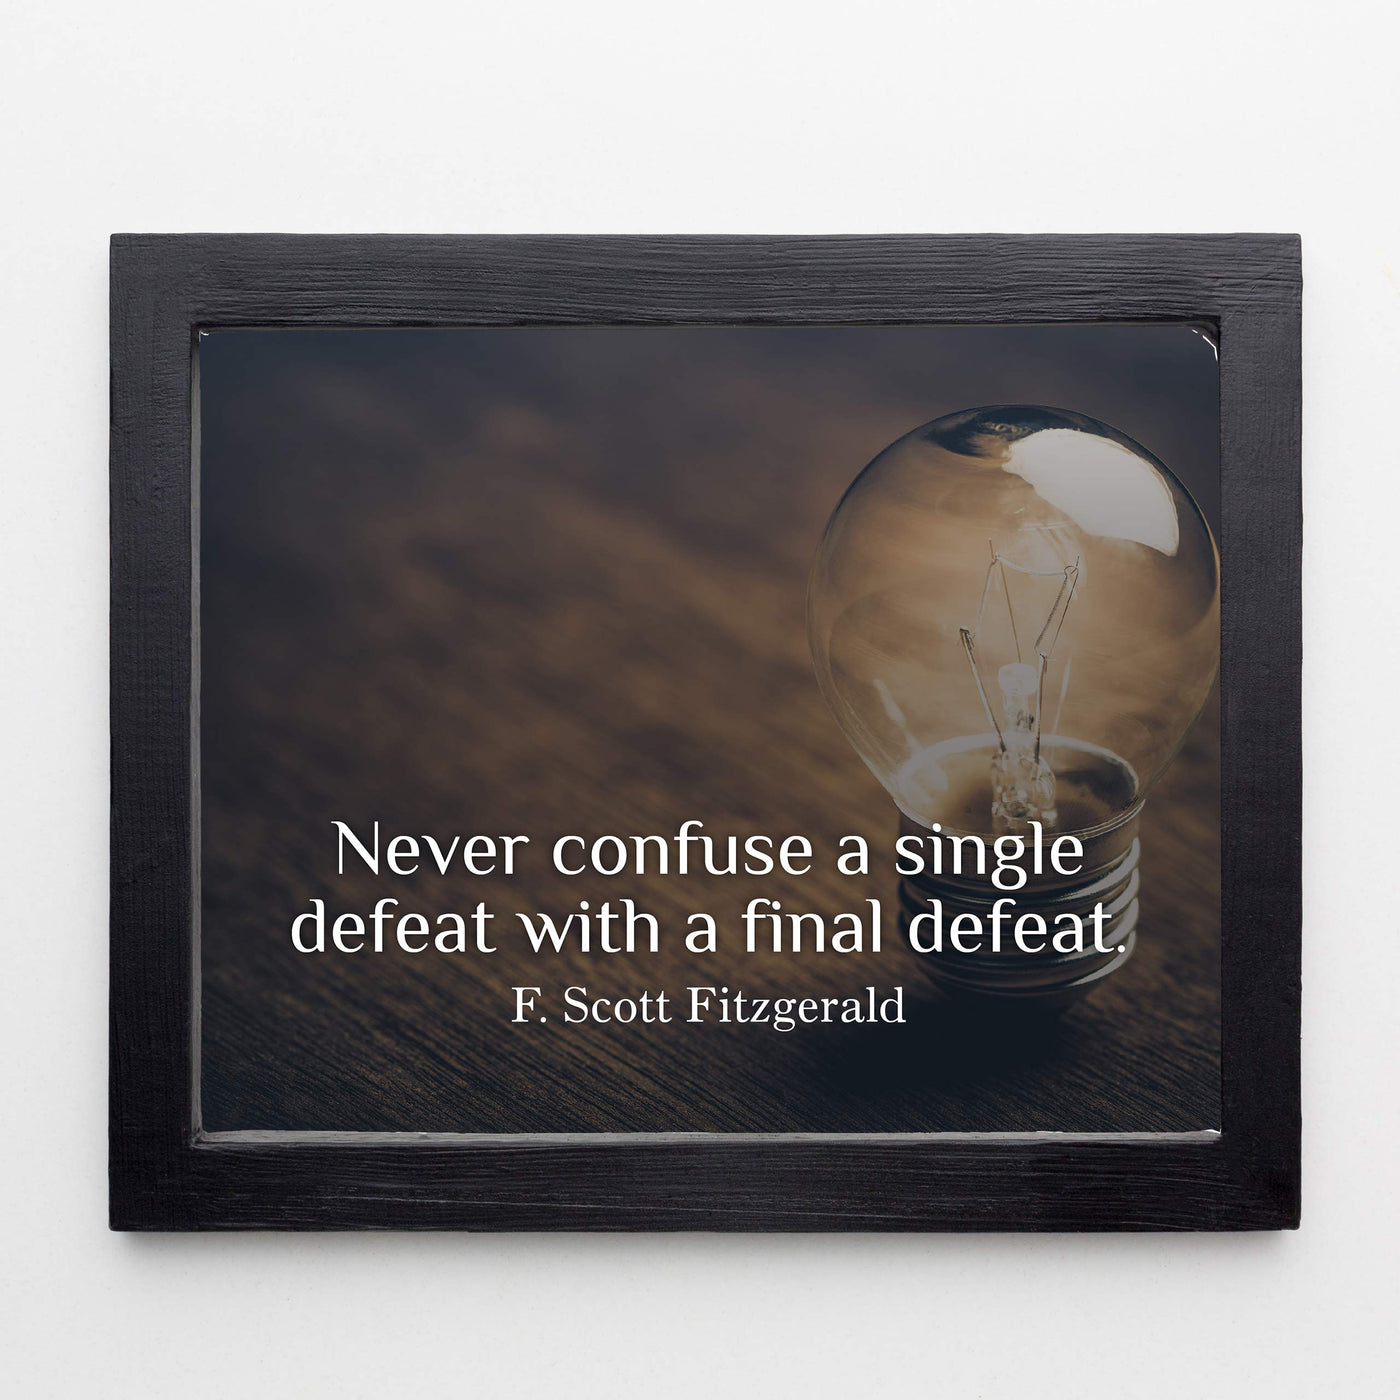 ?Never Confuse A Single Defeat With A Final Defeat" F. Scott Fitzgerald Quotes-14 x 11" Inspirational Wall Art Print-Ready to Frame. Motivational Home-Office-Studio-Dorm Decor. Great Literary Gift!